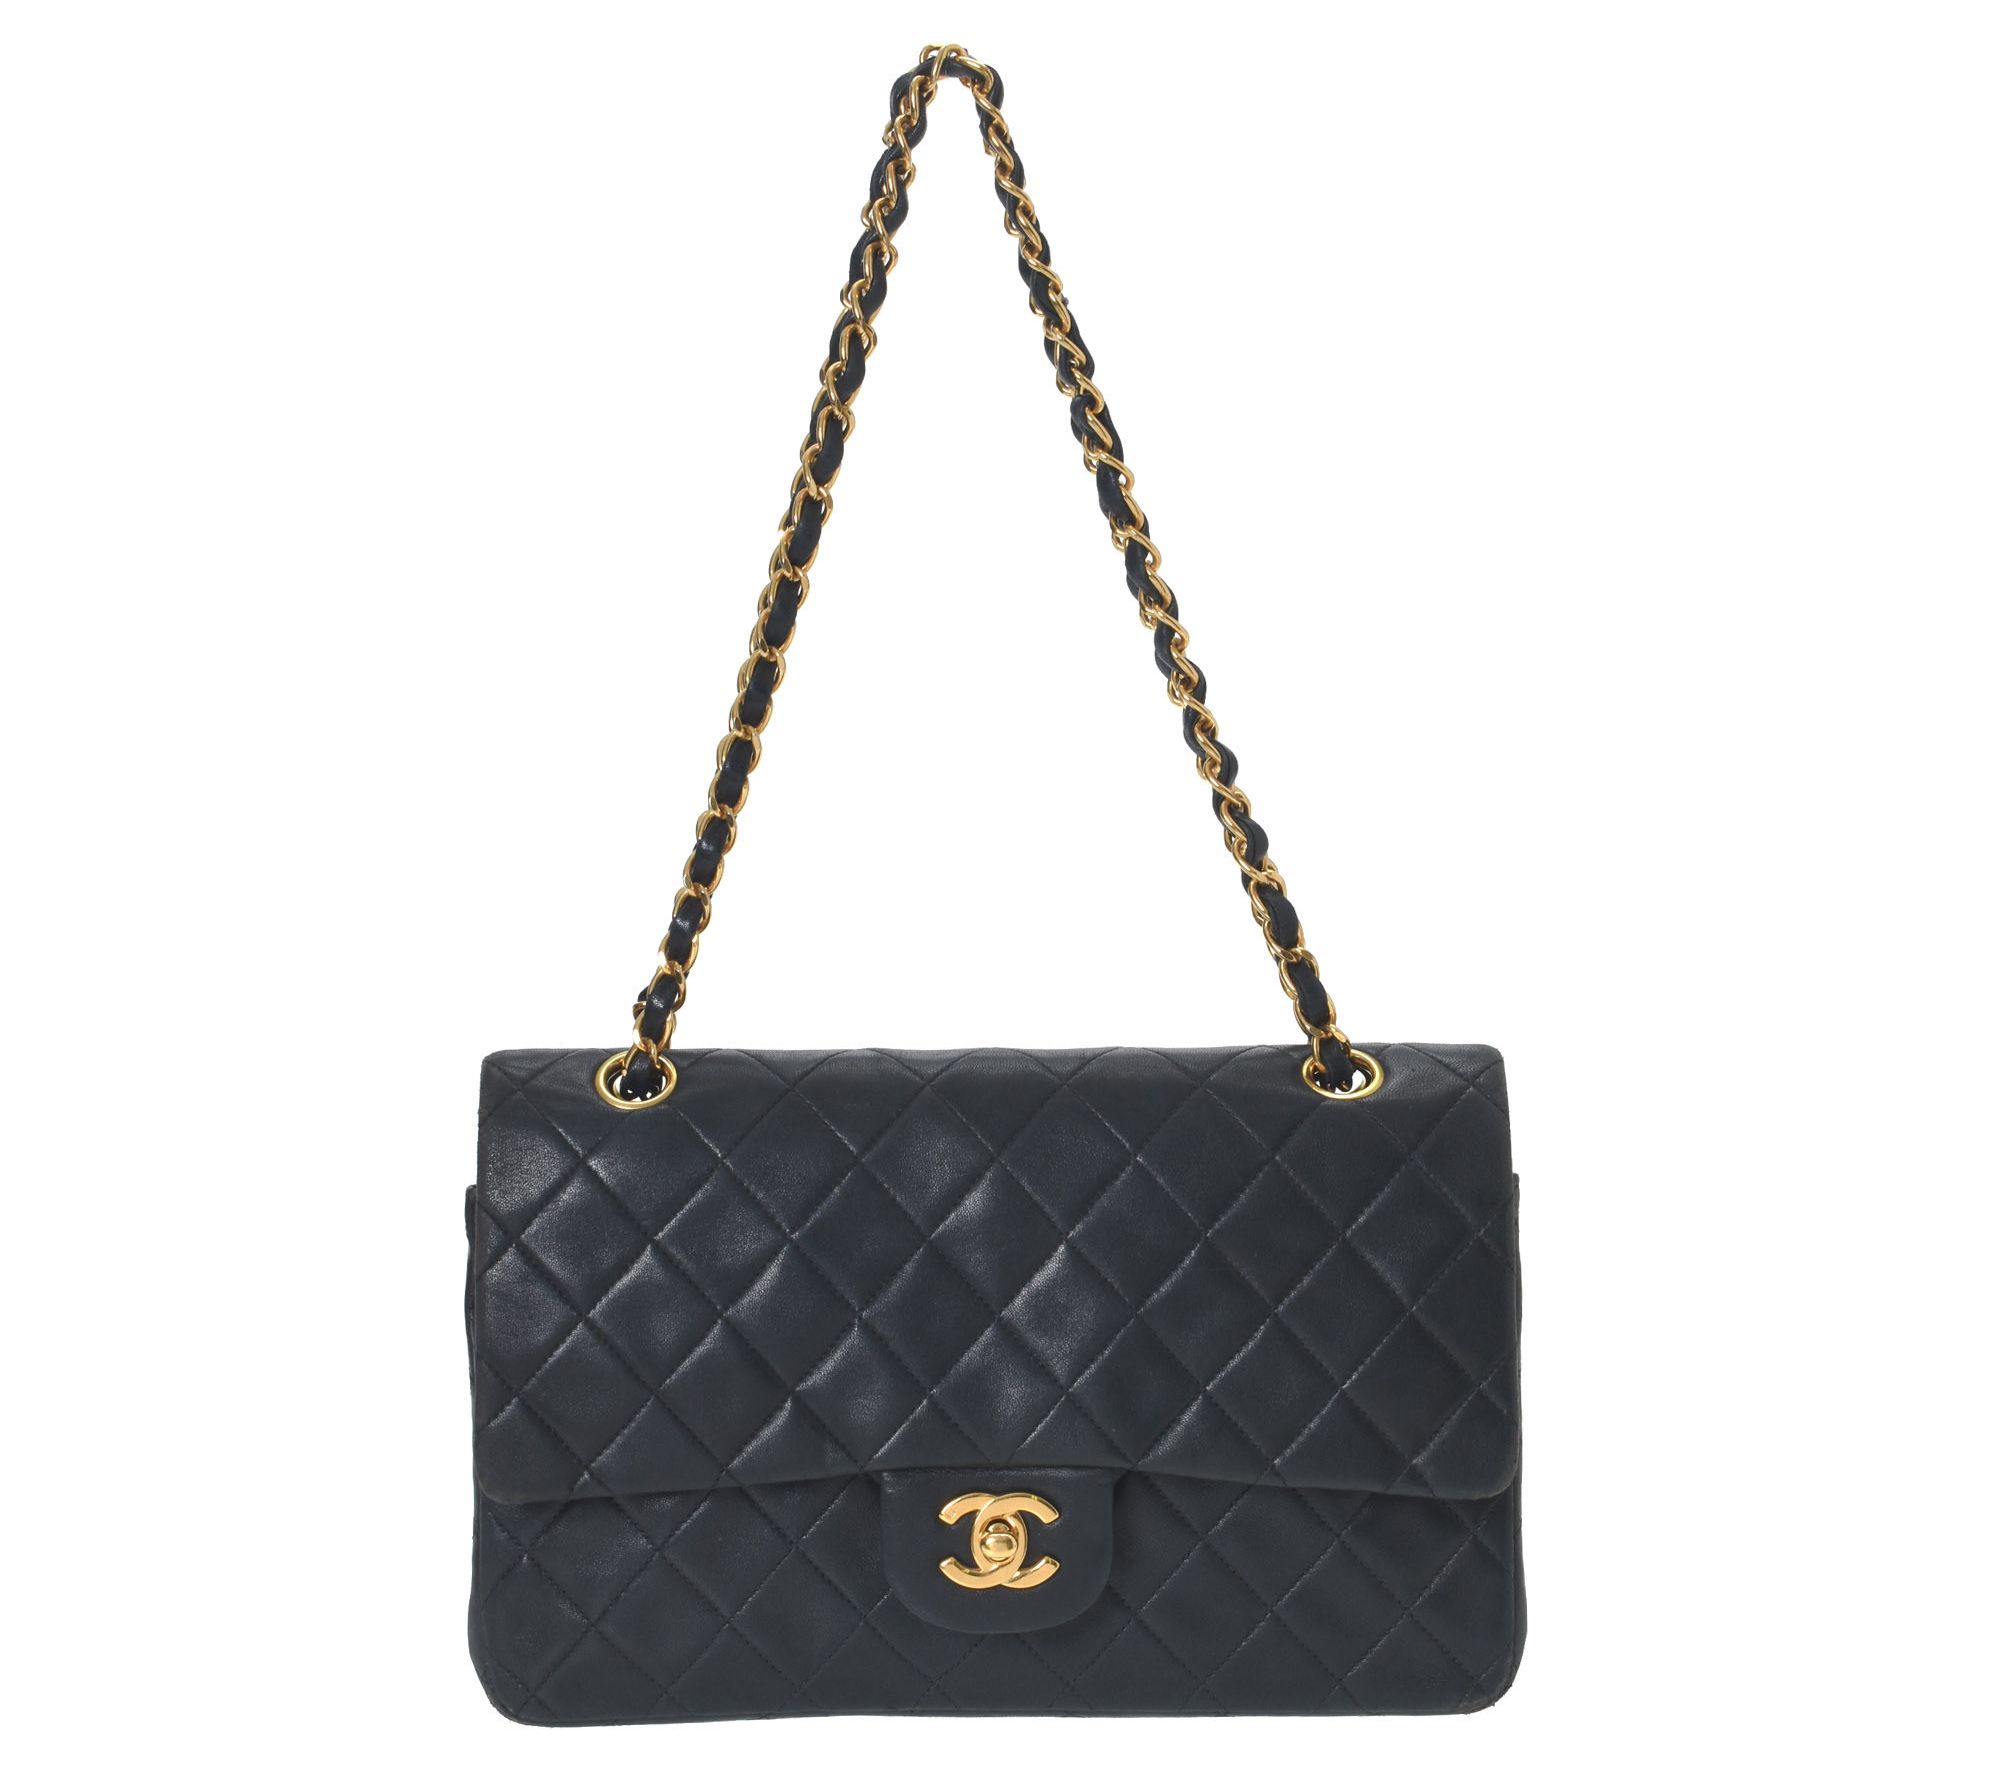 The Ultimate International Price Guide: The Chanel Classic Flap